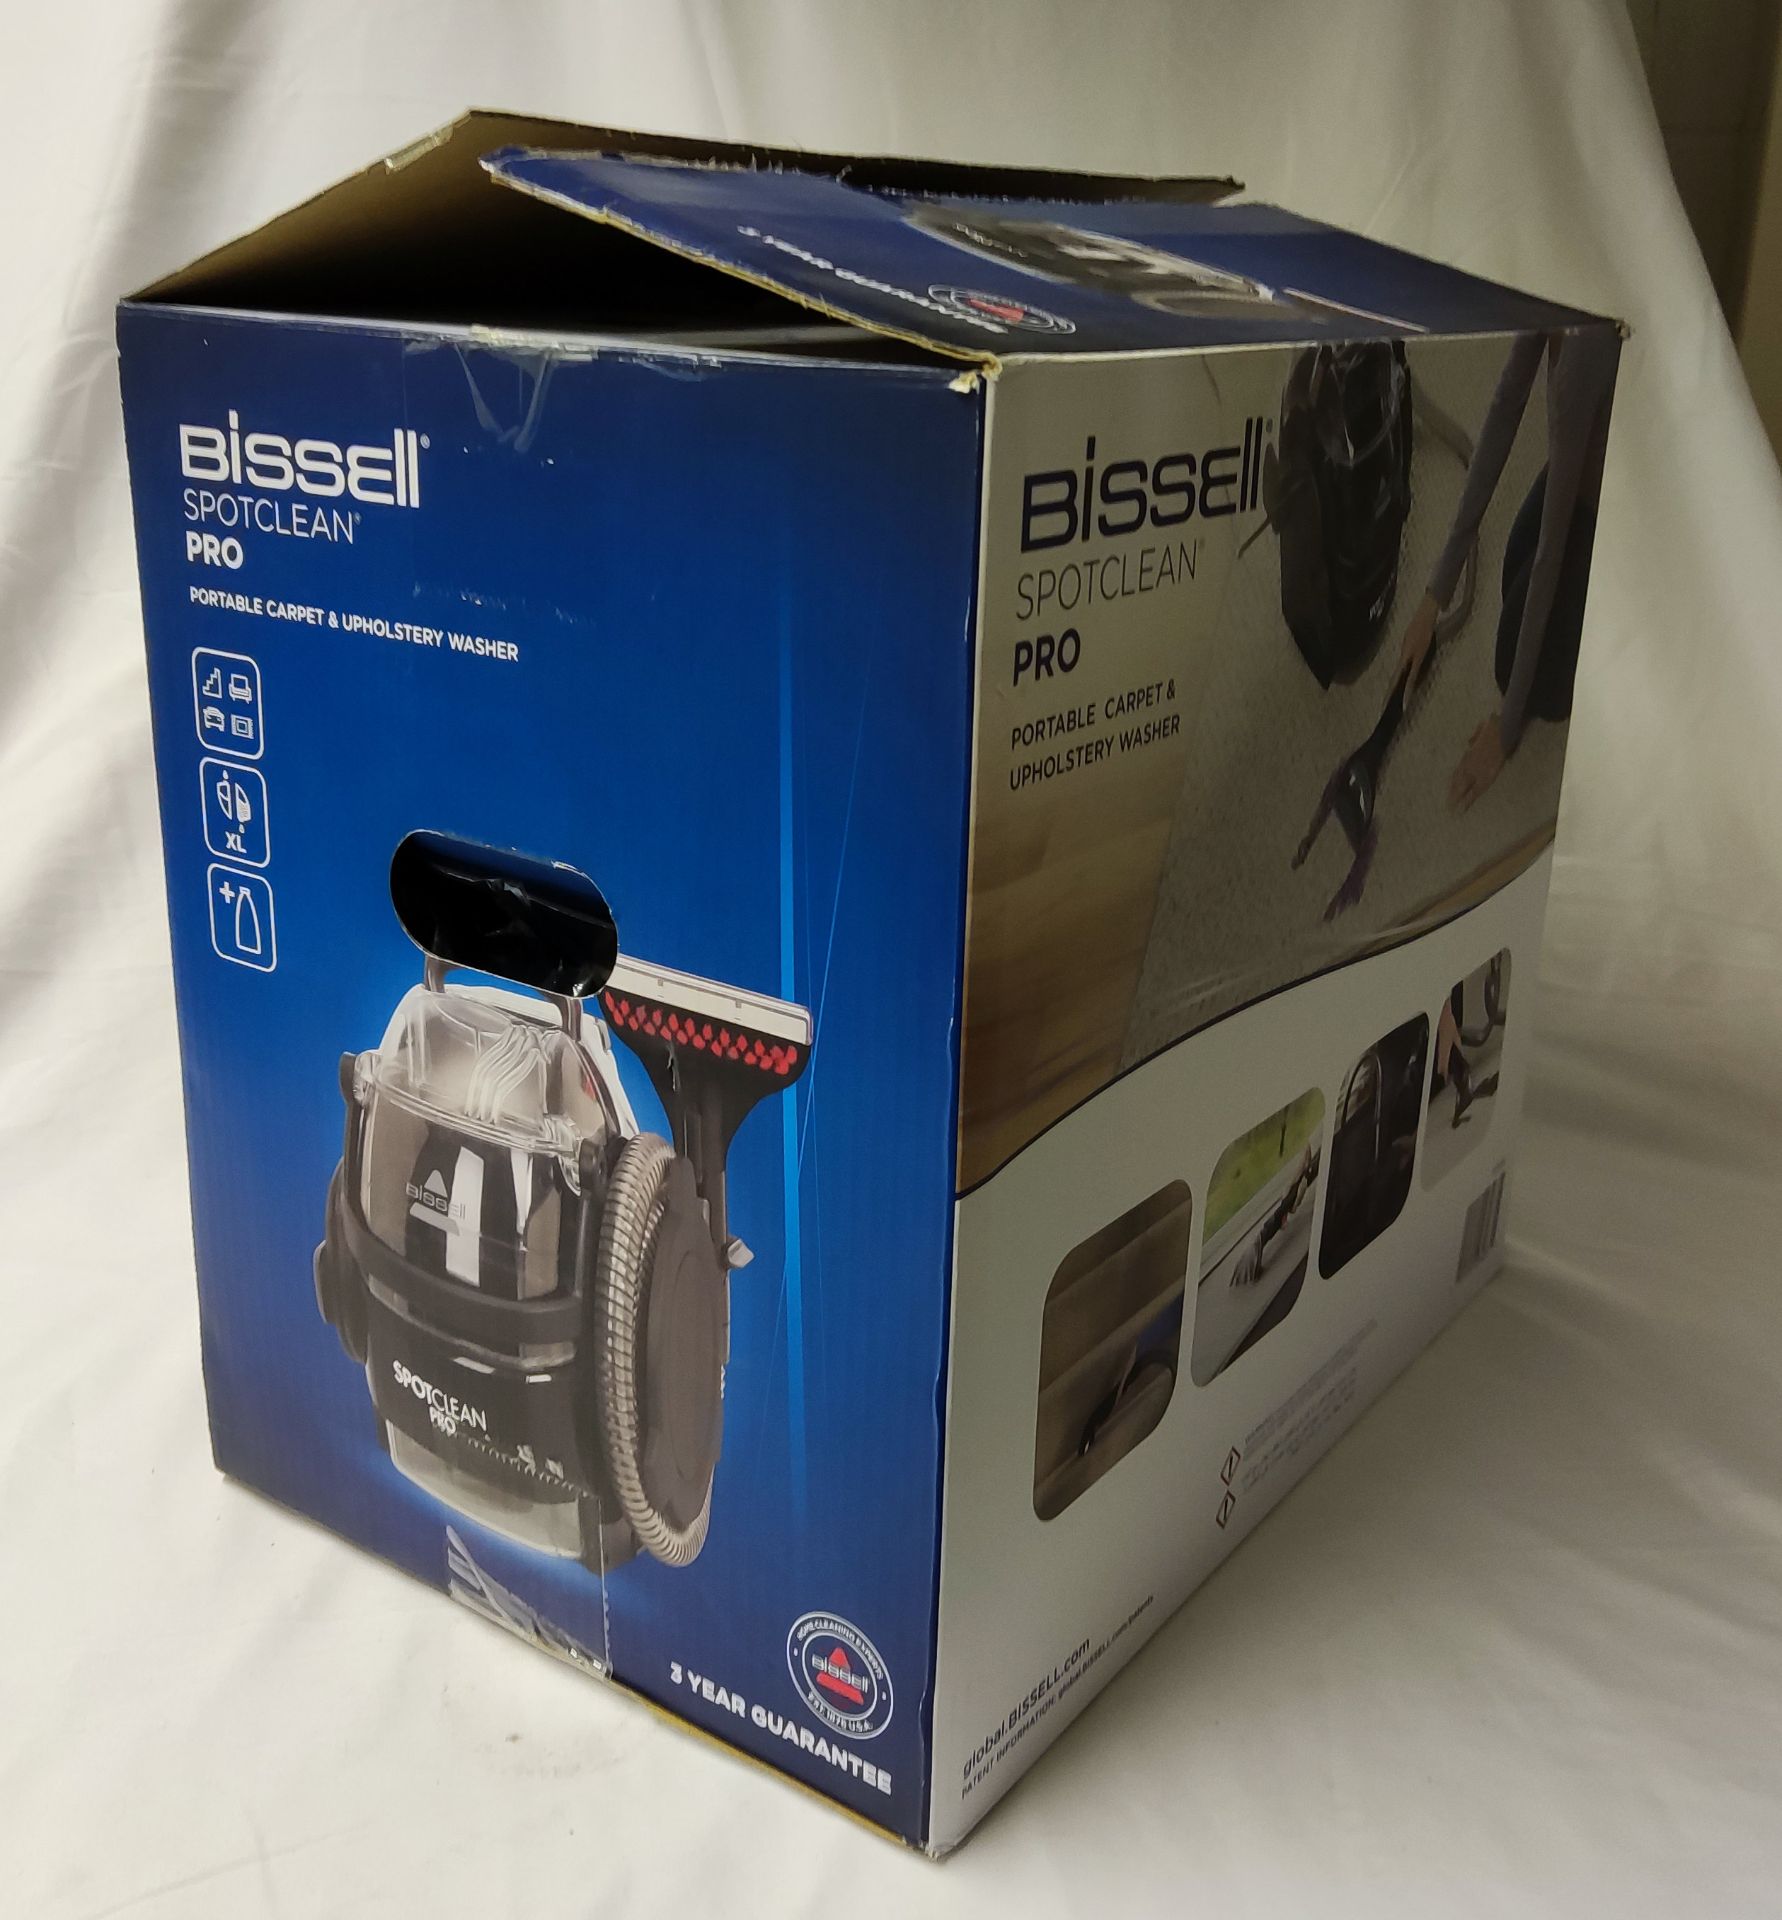 1 x BISSELL Spotclean Pro Portable Carpet & Upholstery Washer - New/Boxed - RRP £179.99 - Ref: - Image 14 of 15